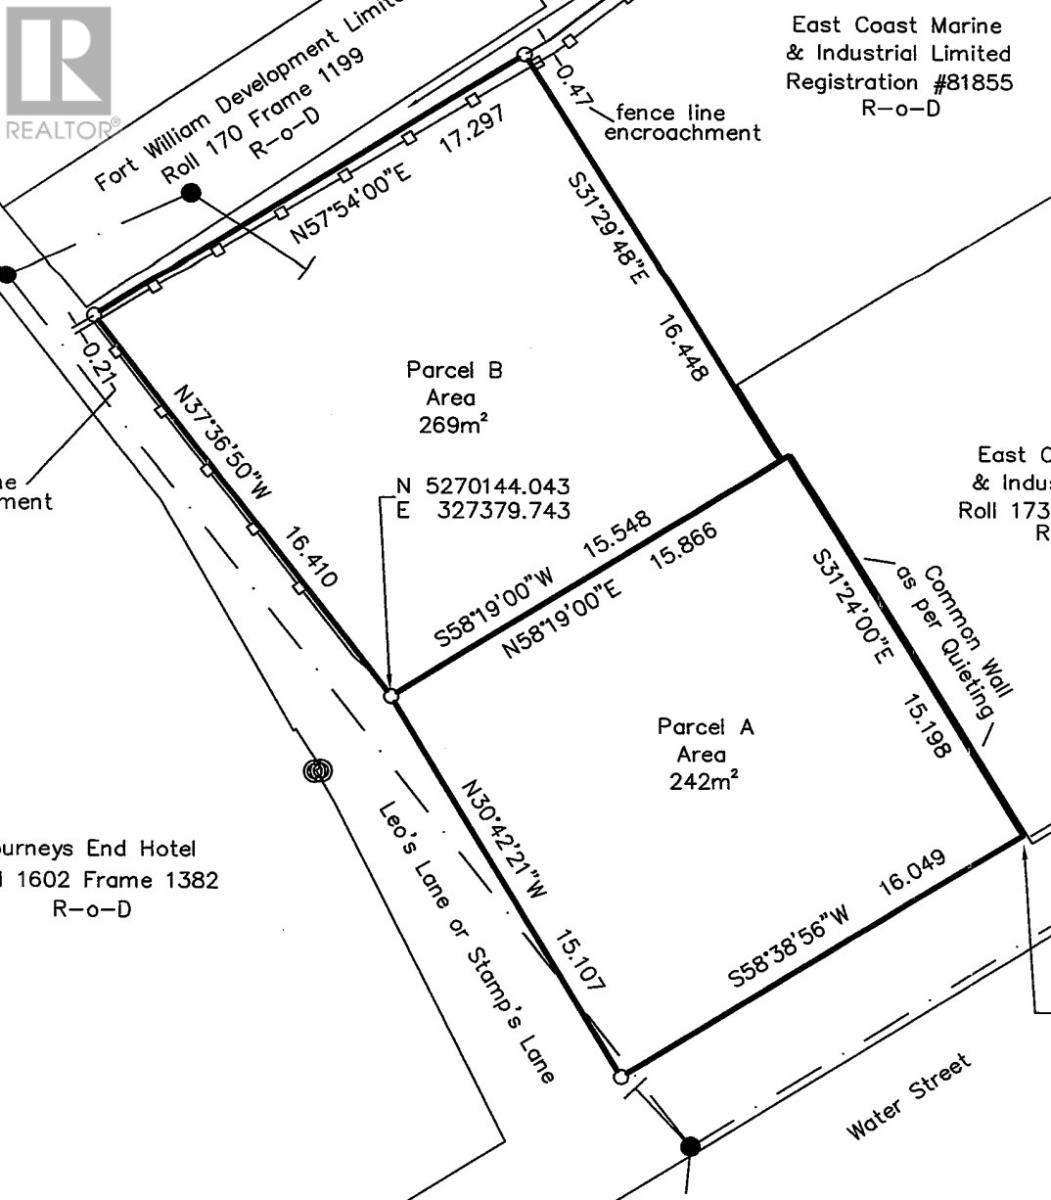 Vacant Land For Sale | 28 Water Street | St John S | A1C1A1